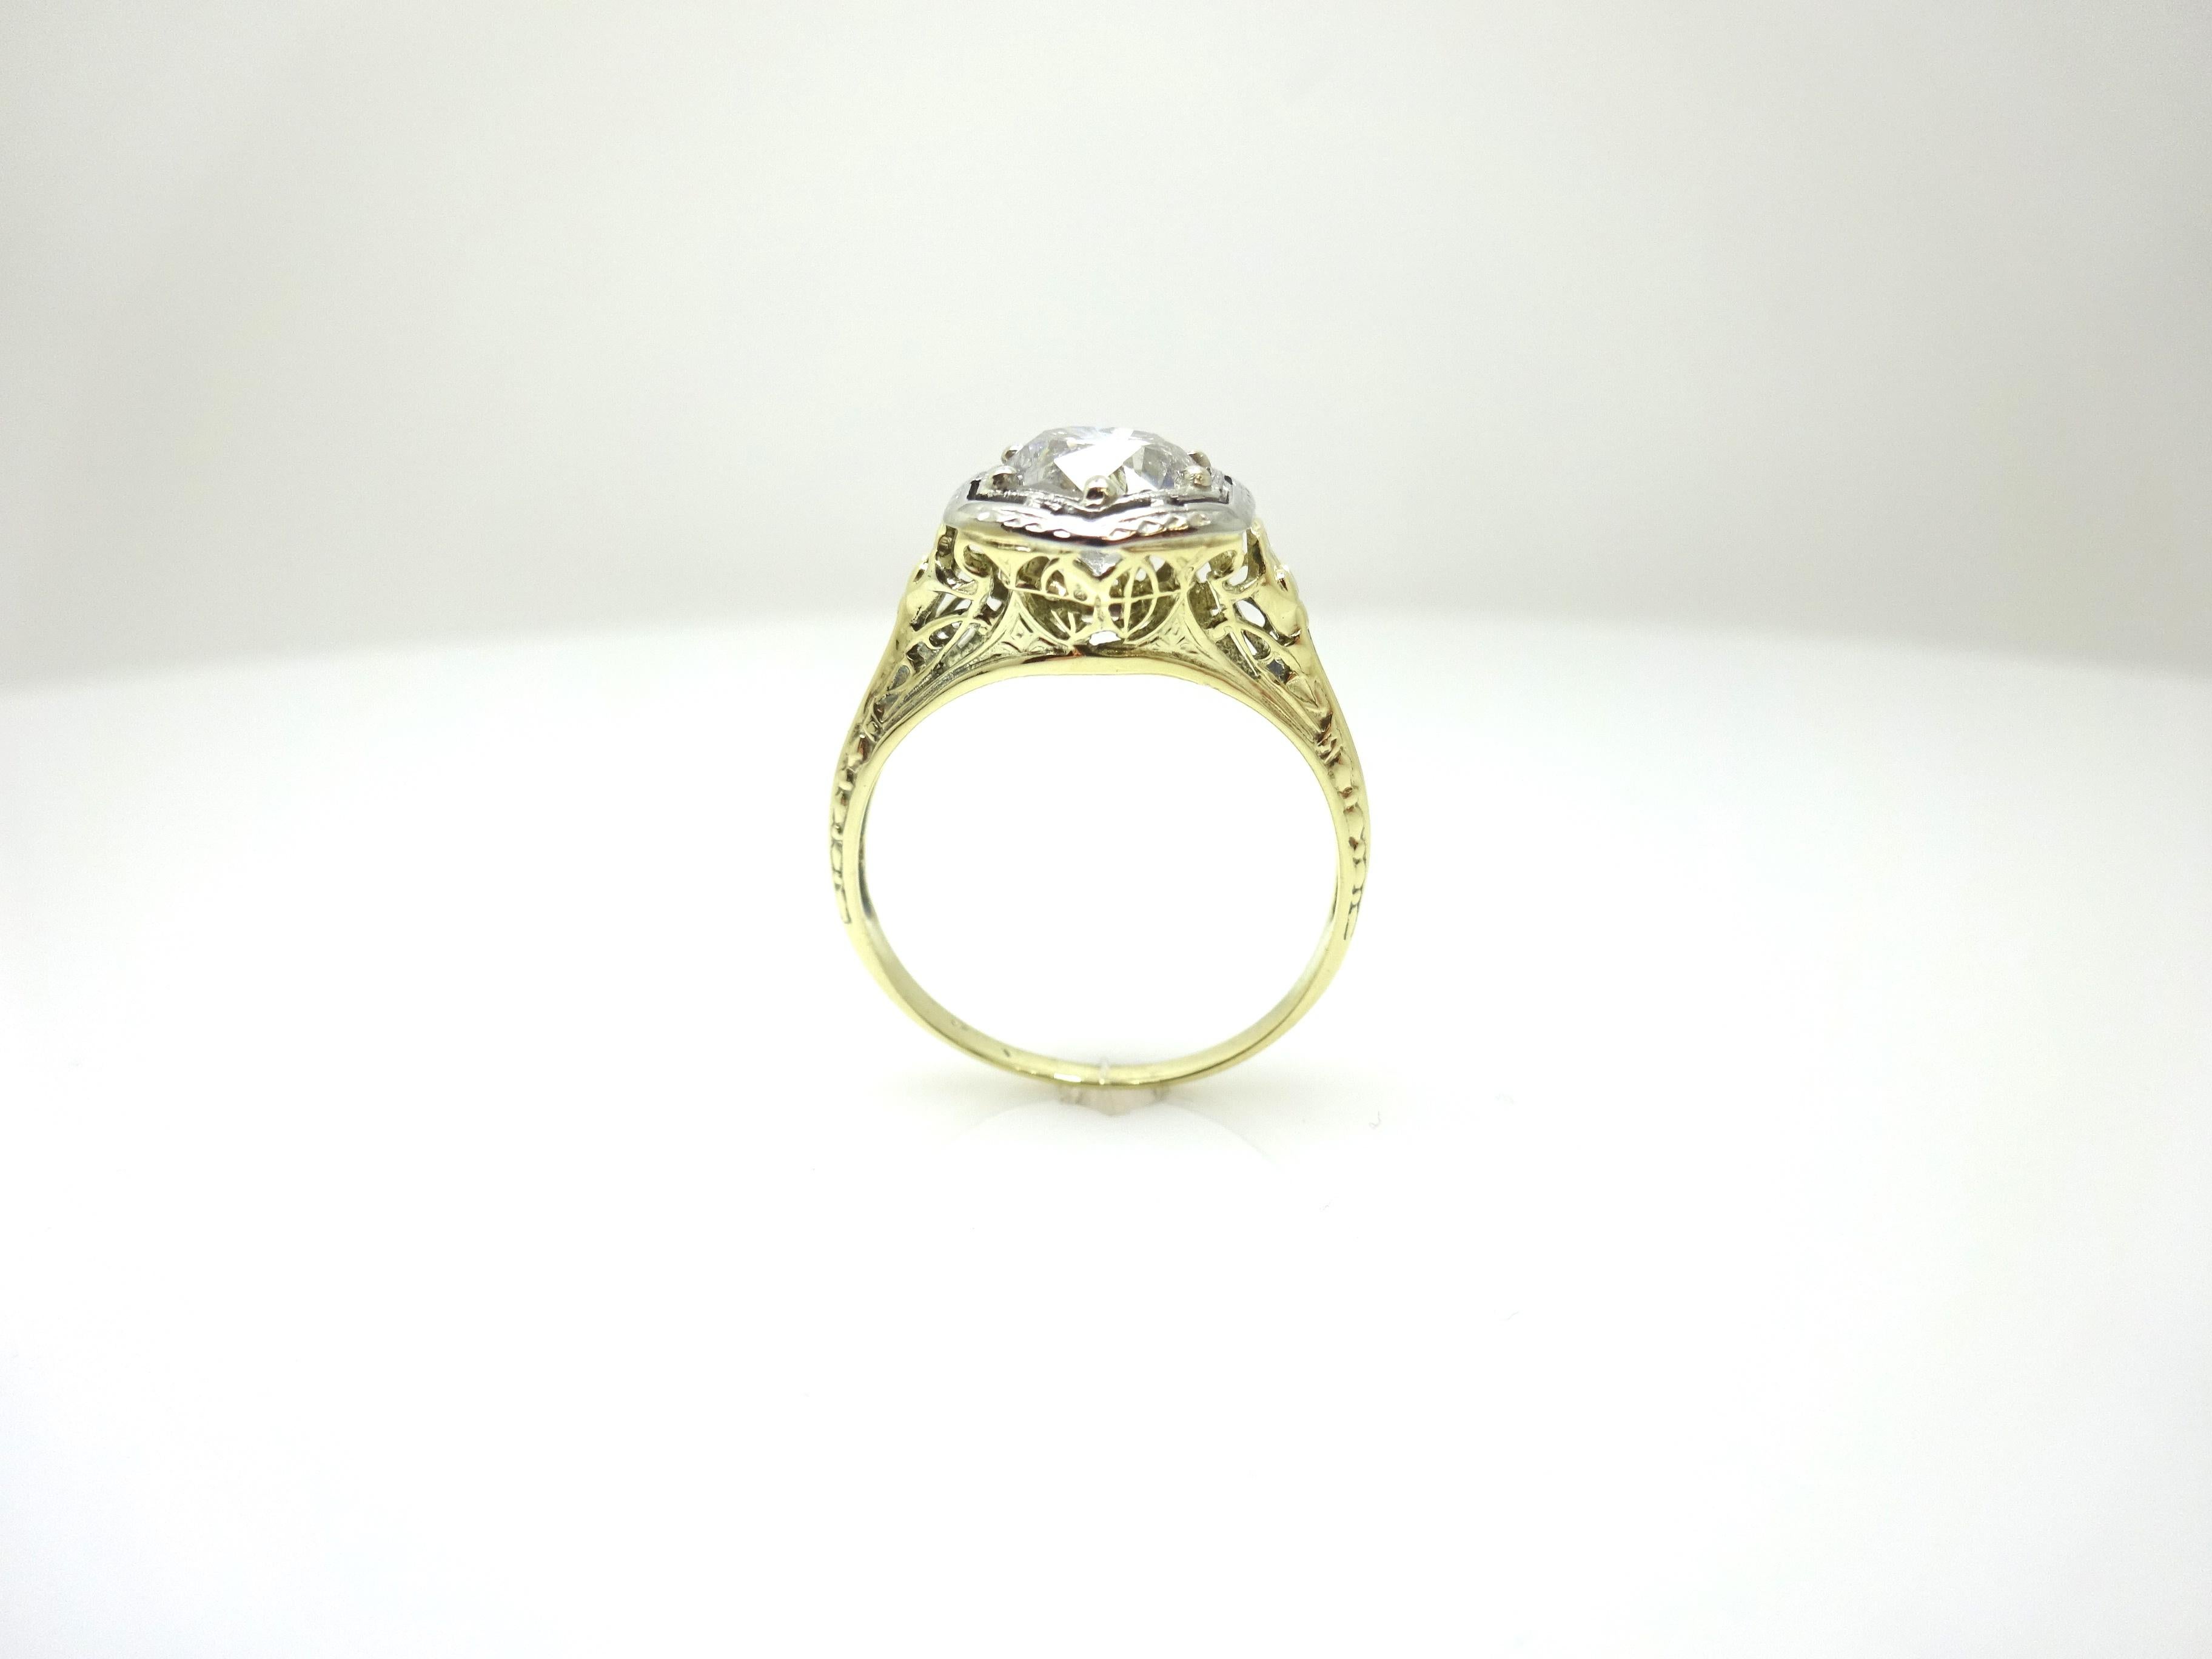 14k Yellow Gold 1.10 Carat Genuine Natural Diamond Filigree Ring (#J3673)

Art Deco 14k yellow gold diamond filigree ring featuring a large round brilliant cut diamond weighing 1.10 carats. The diamond is set in a white gold head with rare yellow